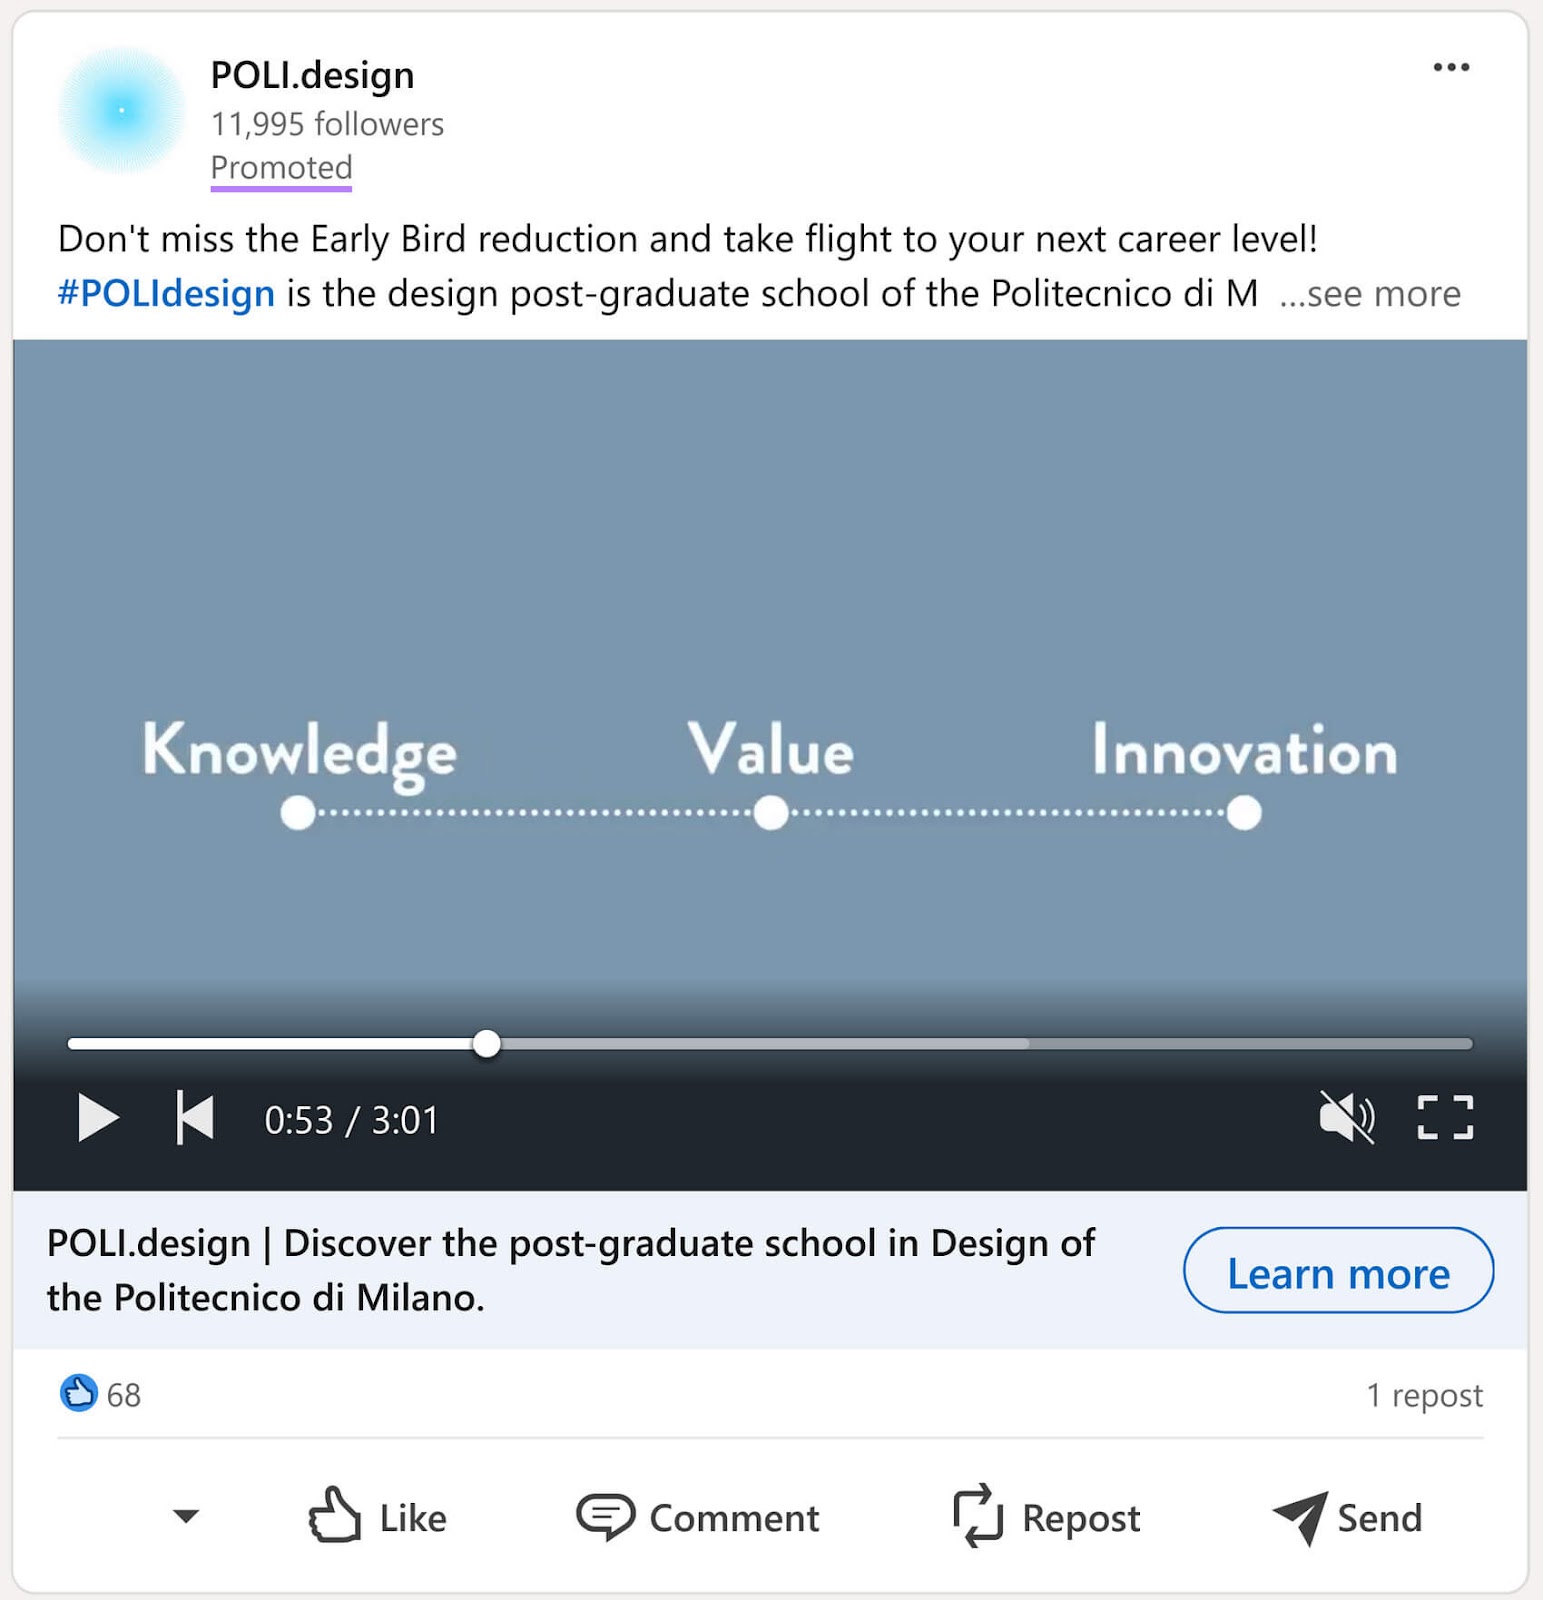 A video on from POLI.design on LinkedIn